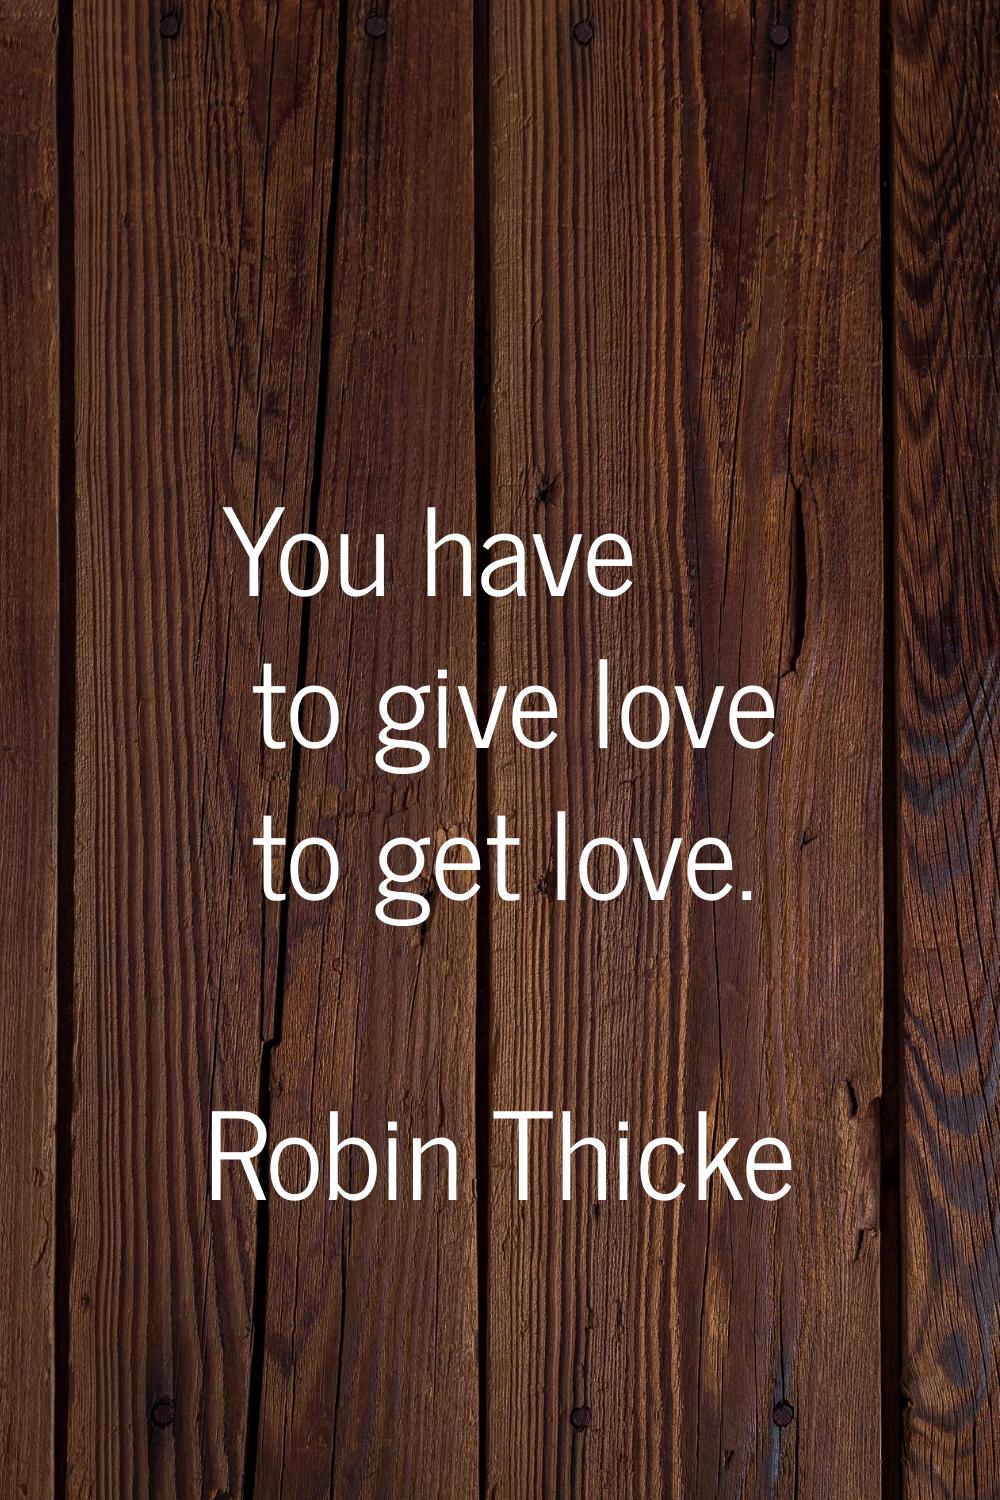 You have to give love to get love.